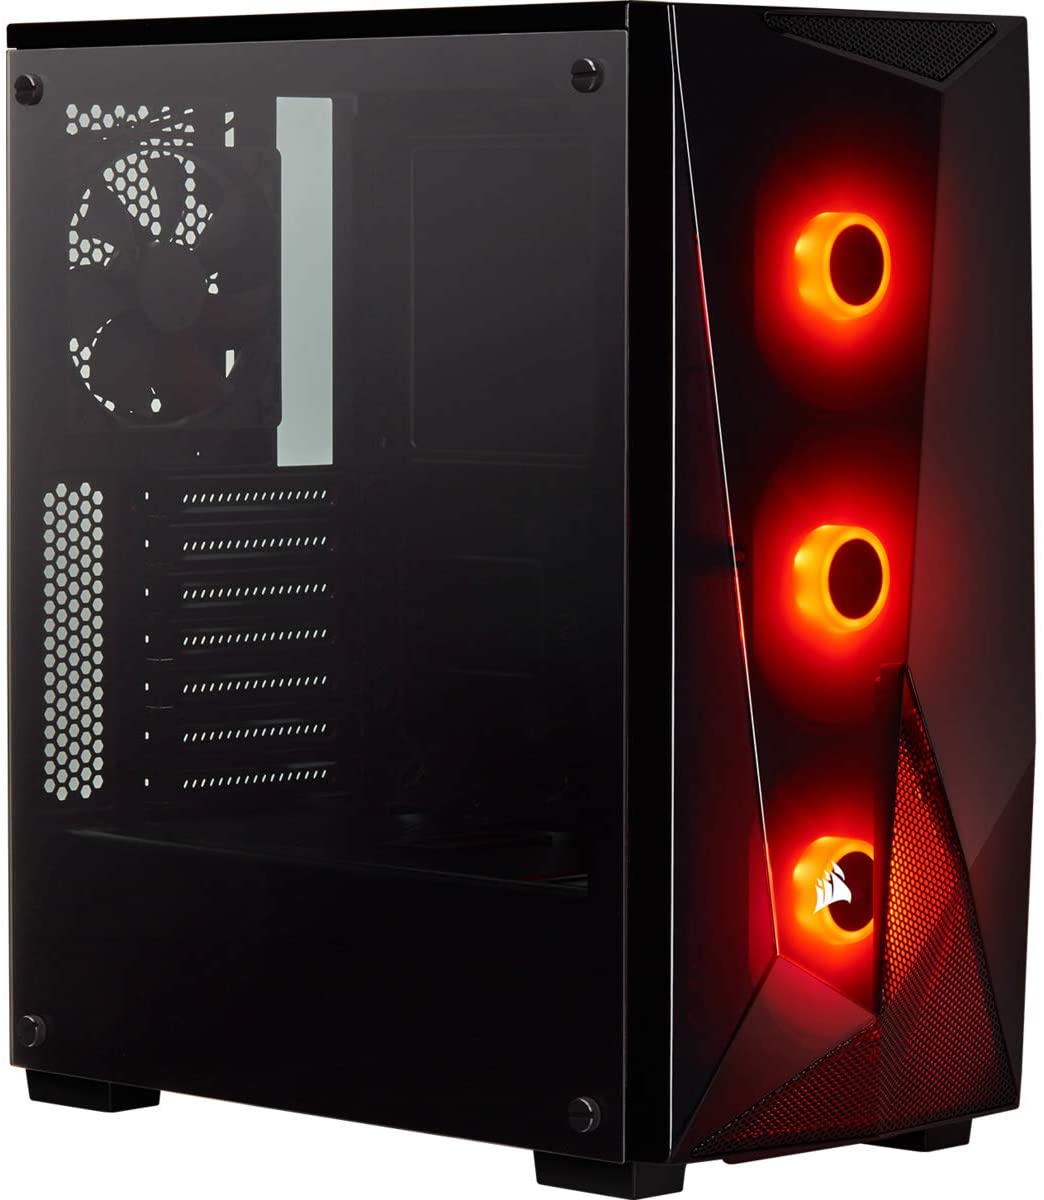 Corsair Carbide Series SPEC-DELTA RGB Tempered Glass Mid-Tower ATX Gaming Case $57.07